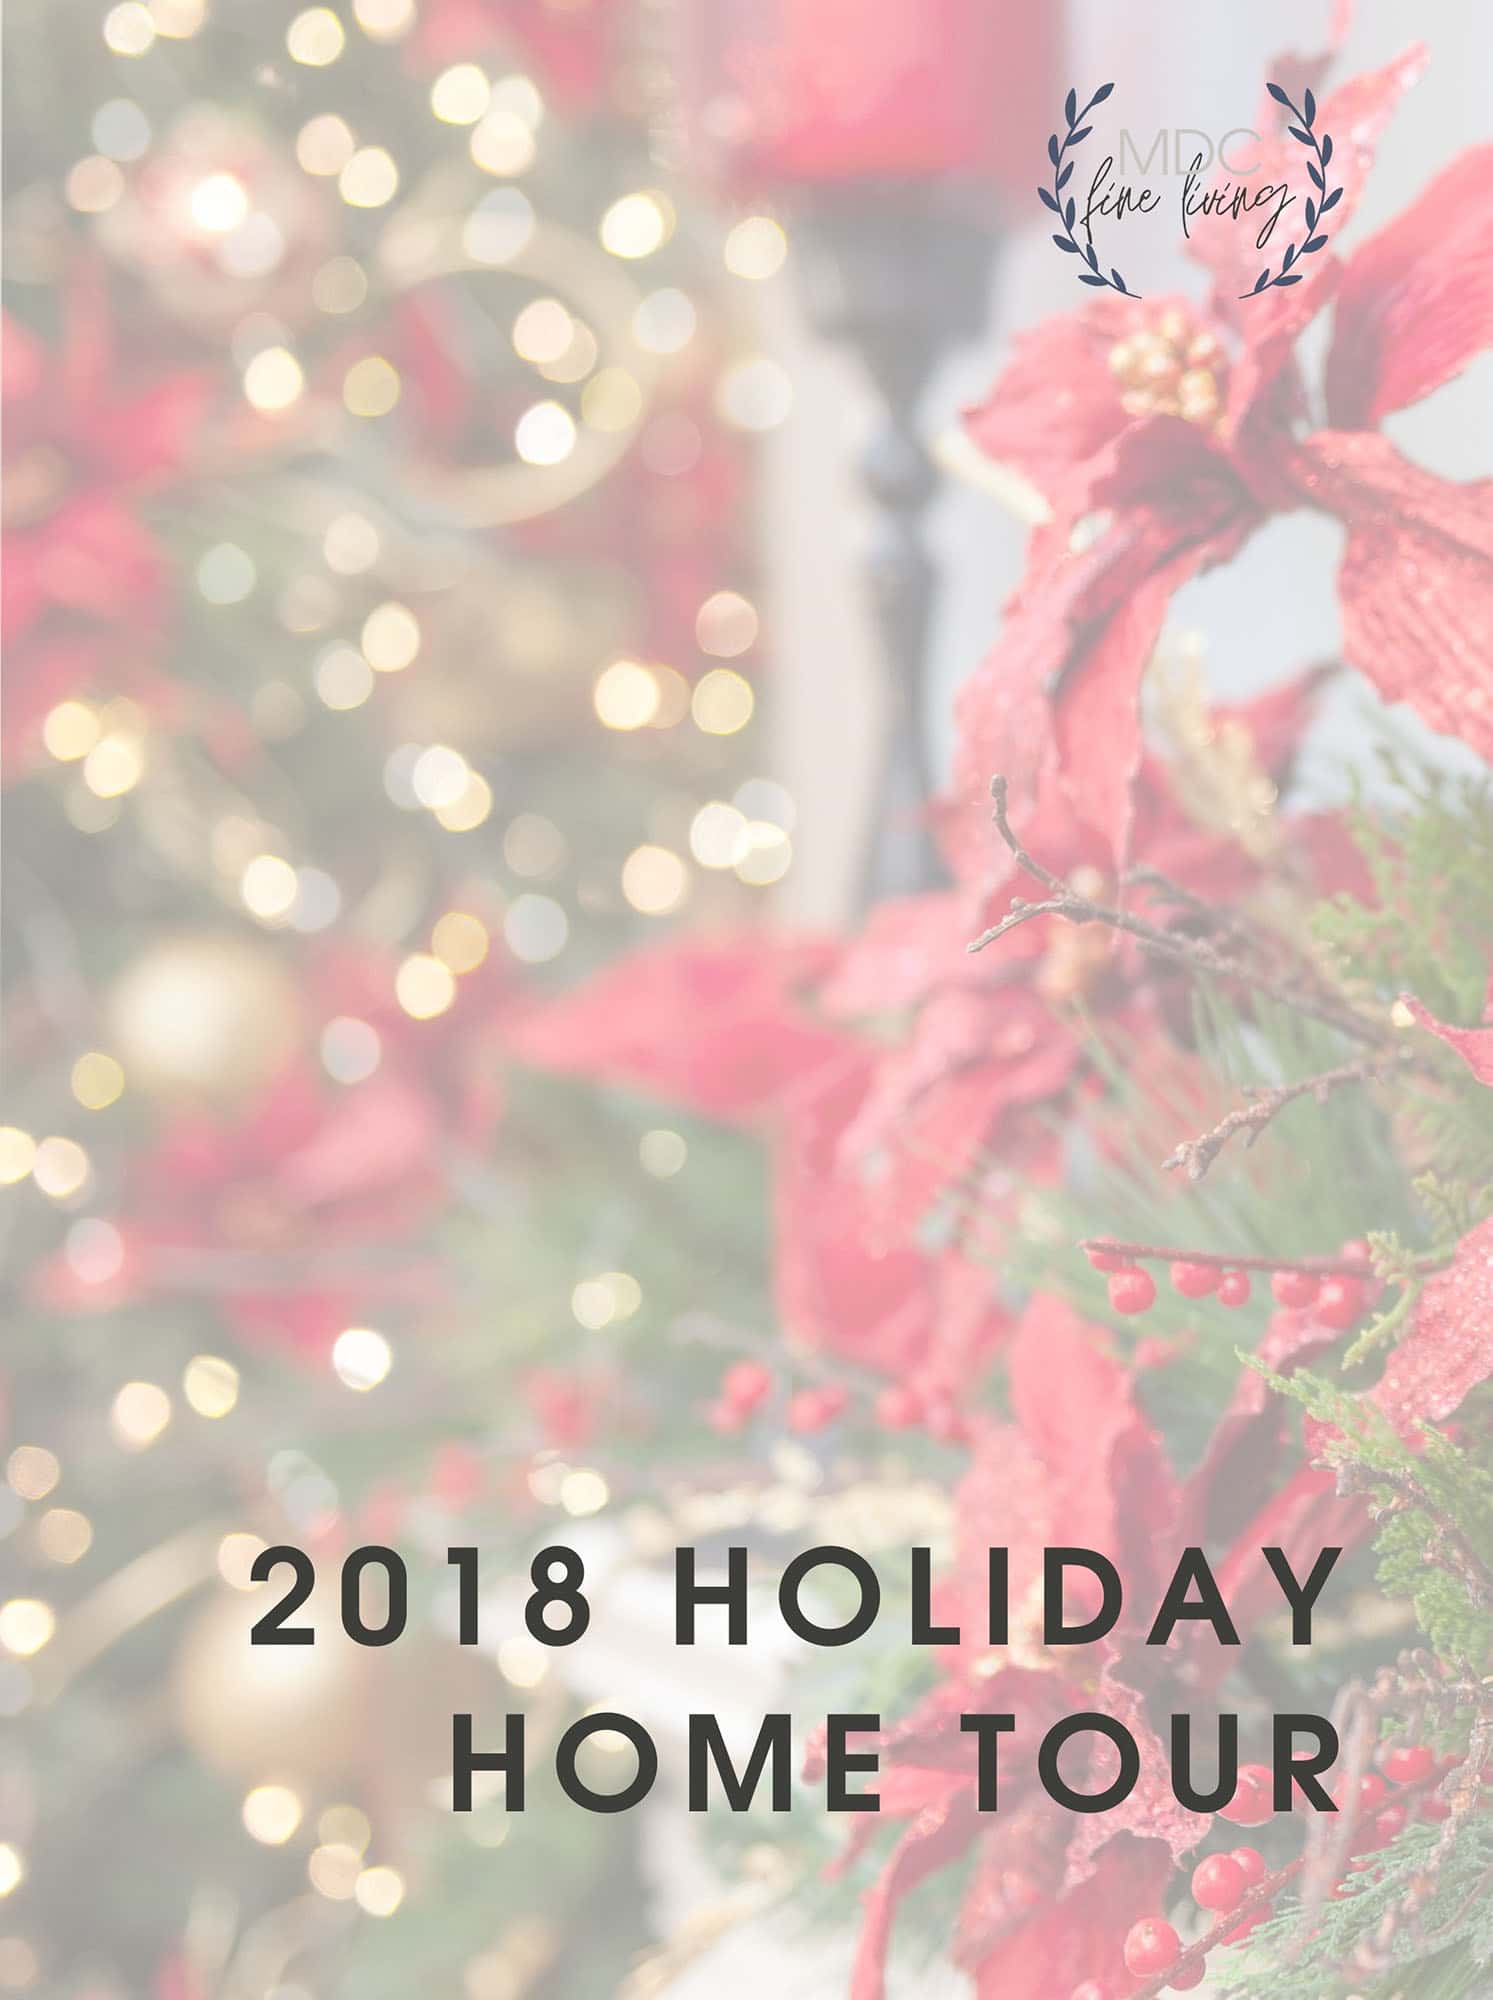 Title card for post that reads, "2018 Holiday Home Tour."